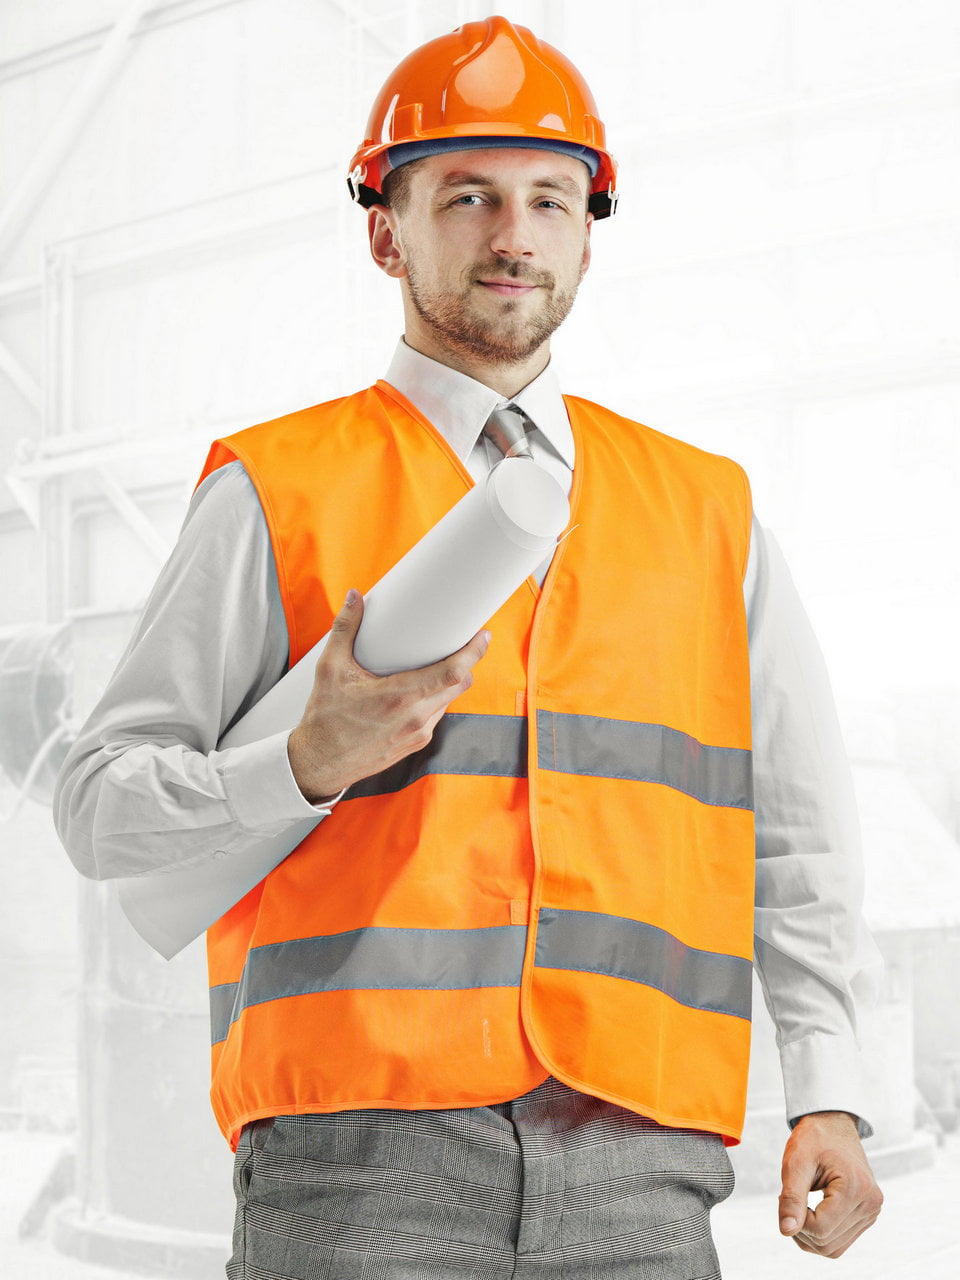 The builder in a construction vest and orange helmet standing against industrial background. Safety specialist, engineer, industry, architecture, manager, occupation, businessman, job concept